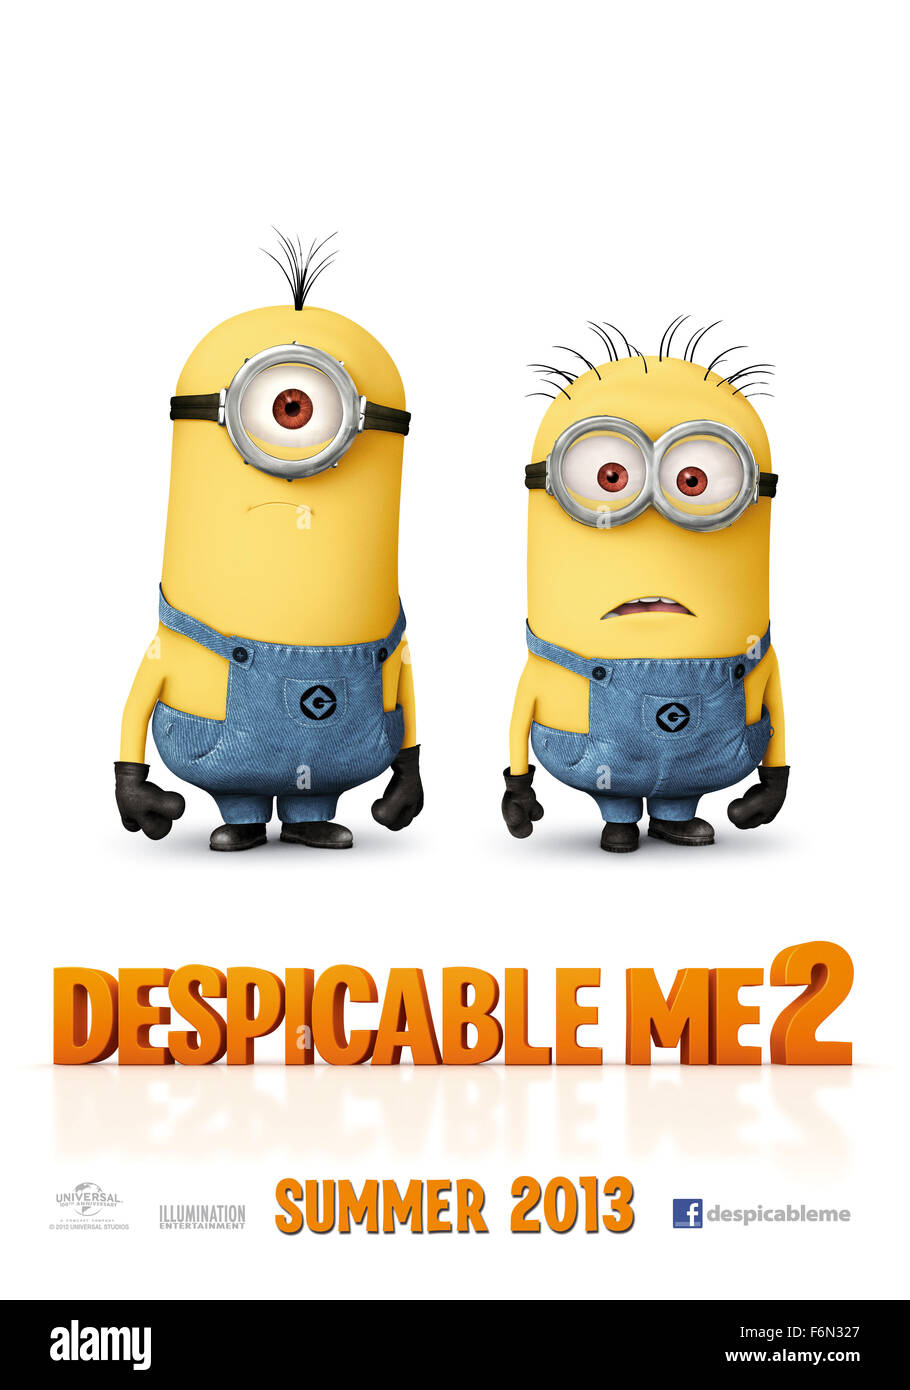 RELEASE DATE: July 3, 2013 TITLE: Despicable Me 2 STUDIO: Universal Pictures DIRECTOR: Pierre Coffin, Chris Renaud PLOT: Gru is recruited by the Anti-Villain League to help deal with a powerful new super criminal PICTURED: Steve Carellas Gru (voice), Ken Jeong as Floyd (voice), Kristen Wiig as Lucy Wilde (voice) (Credit: c Universal Pictures/Entertainment Pictures) Stock Photo